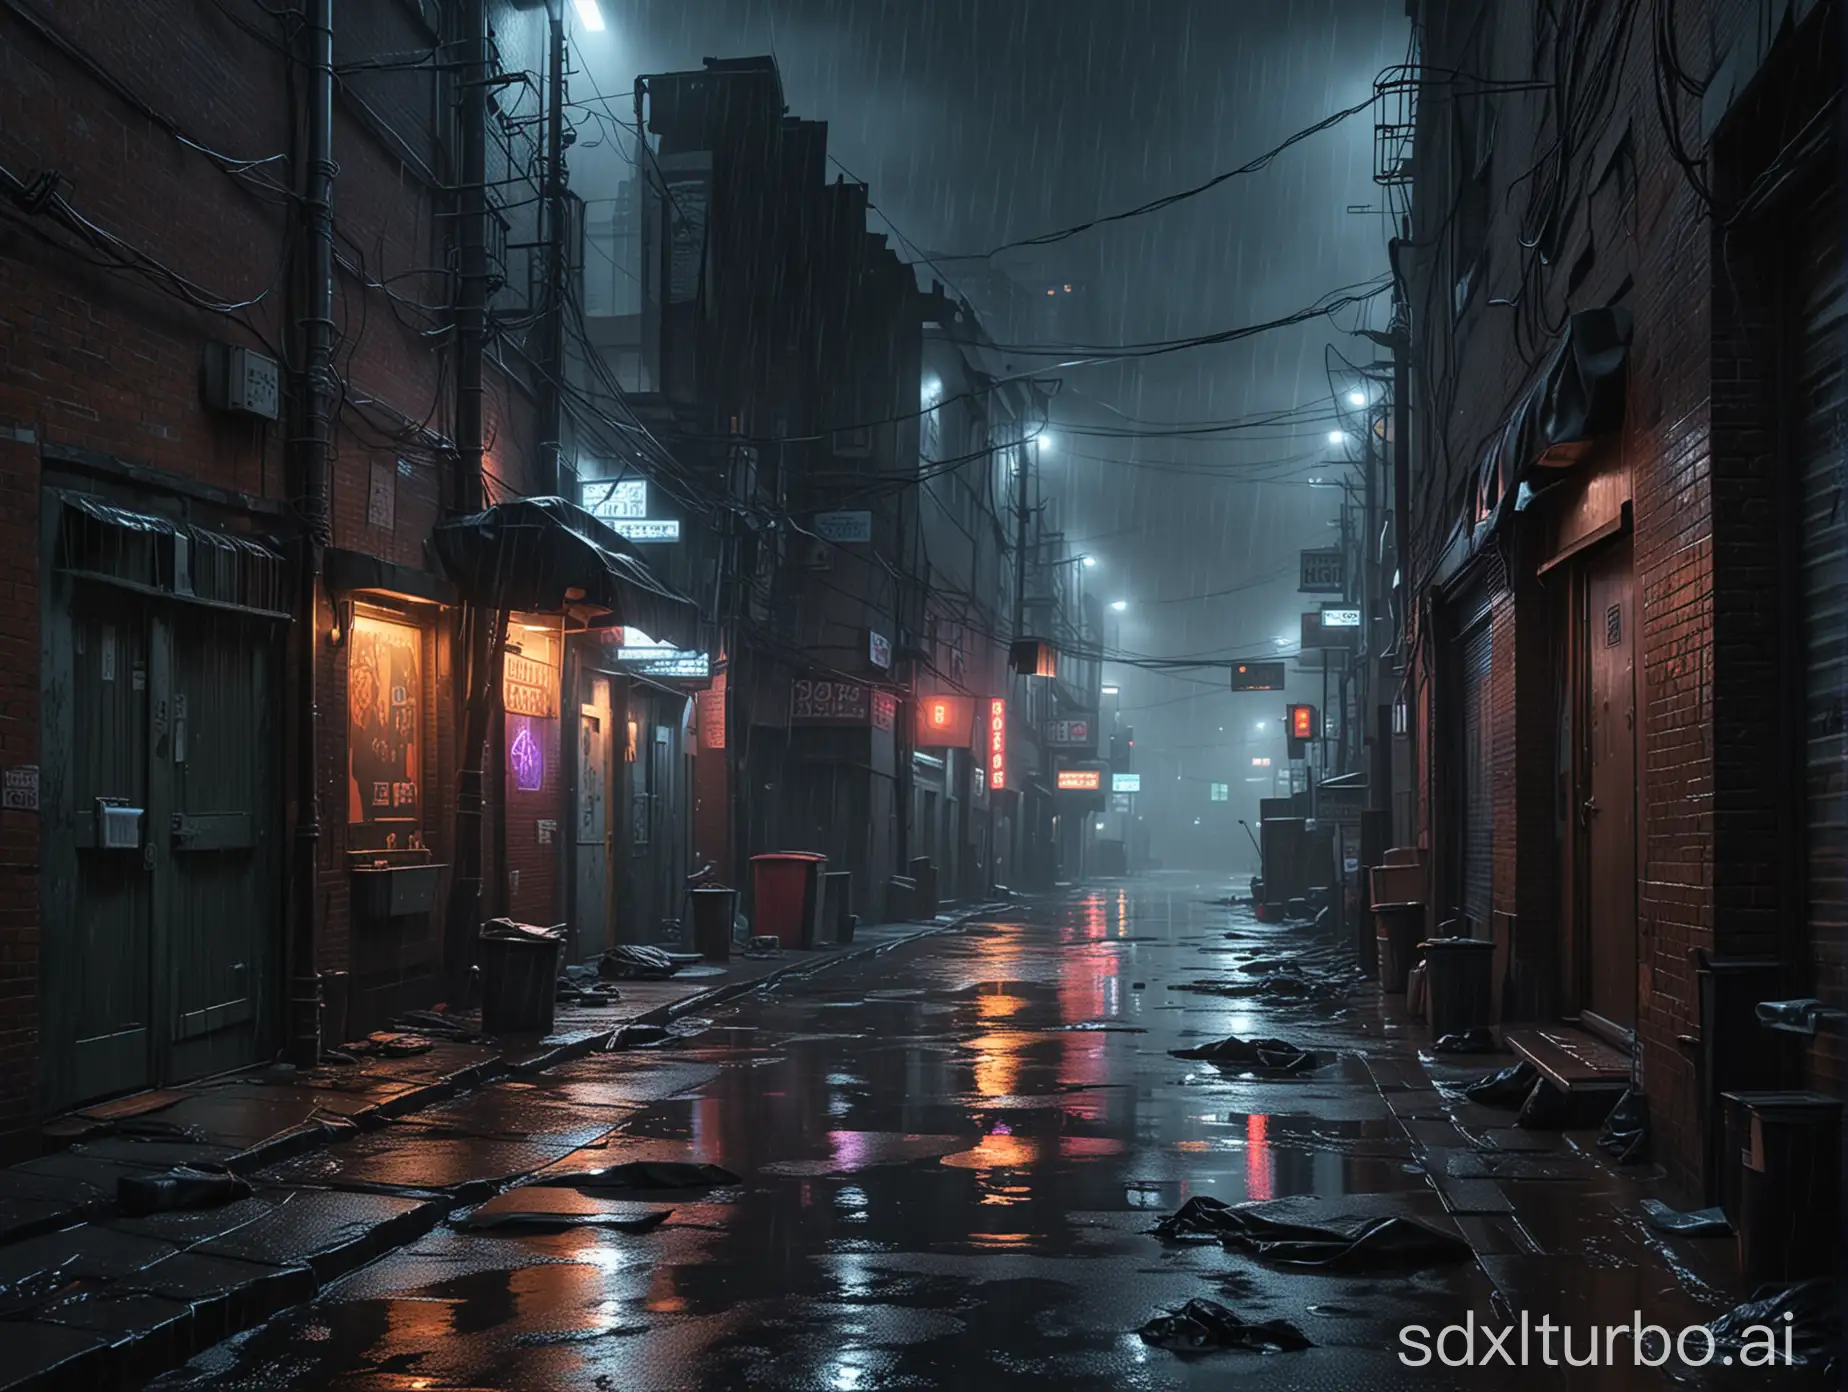 Rainy-Cyberpunk-Back-Alley-Scene-Neon-Lights-and-Thunderstorm-Ambiance